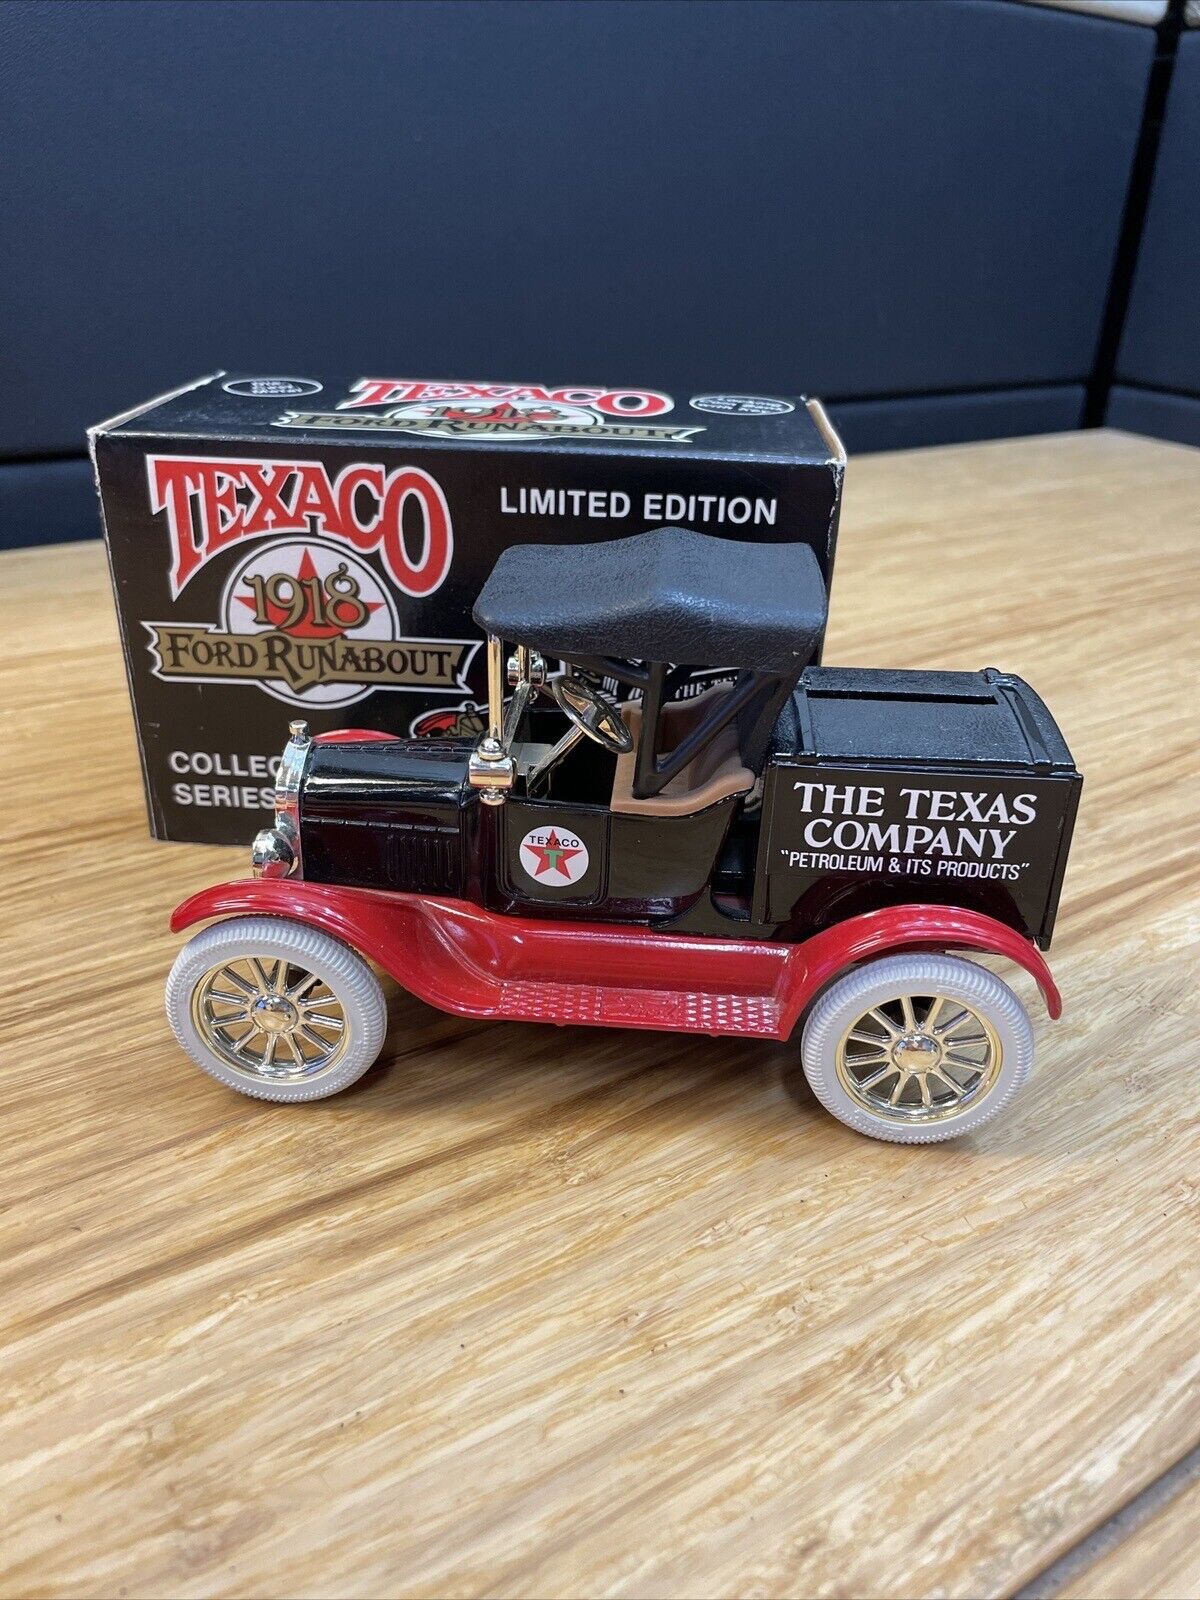 Vintage 1988 Ertl Texaco 1918 Ford Runabout Coin Bank Complete Stock #9740VO KG